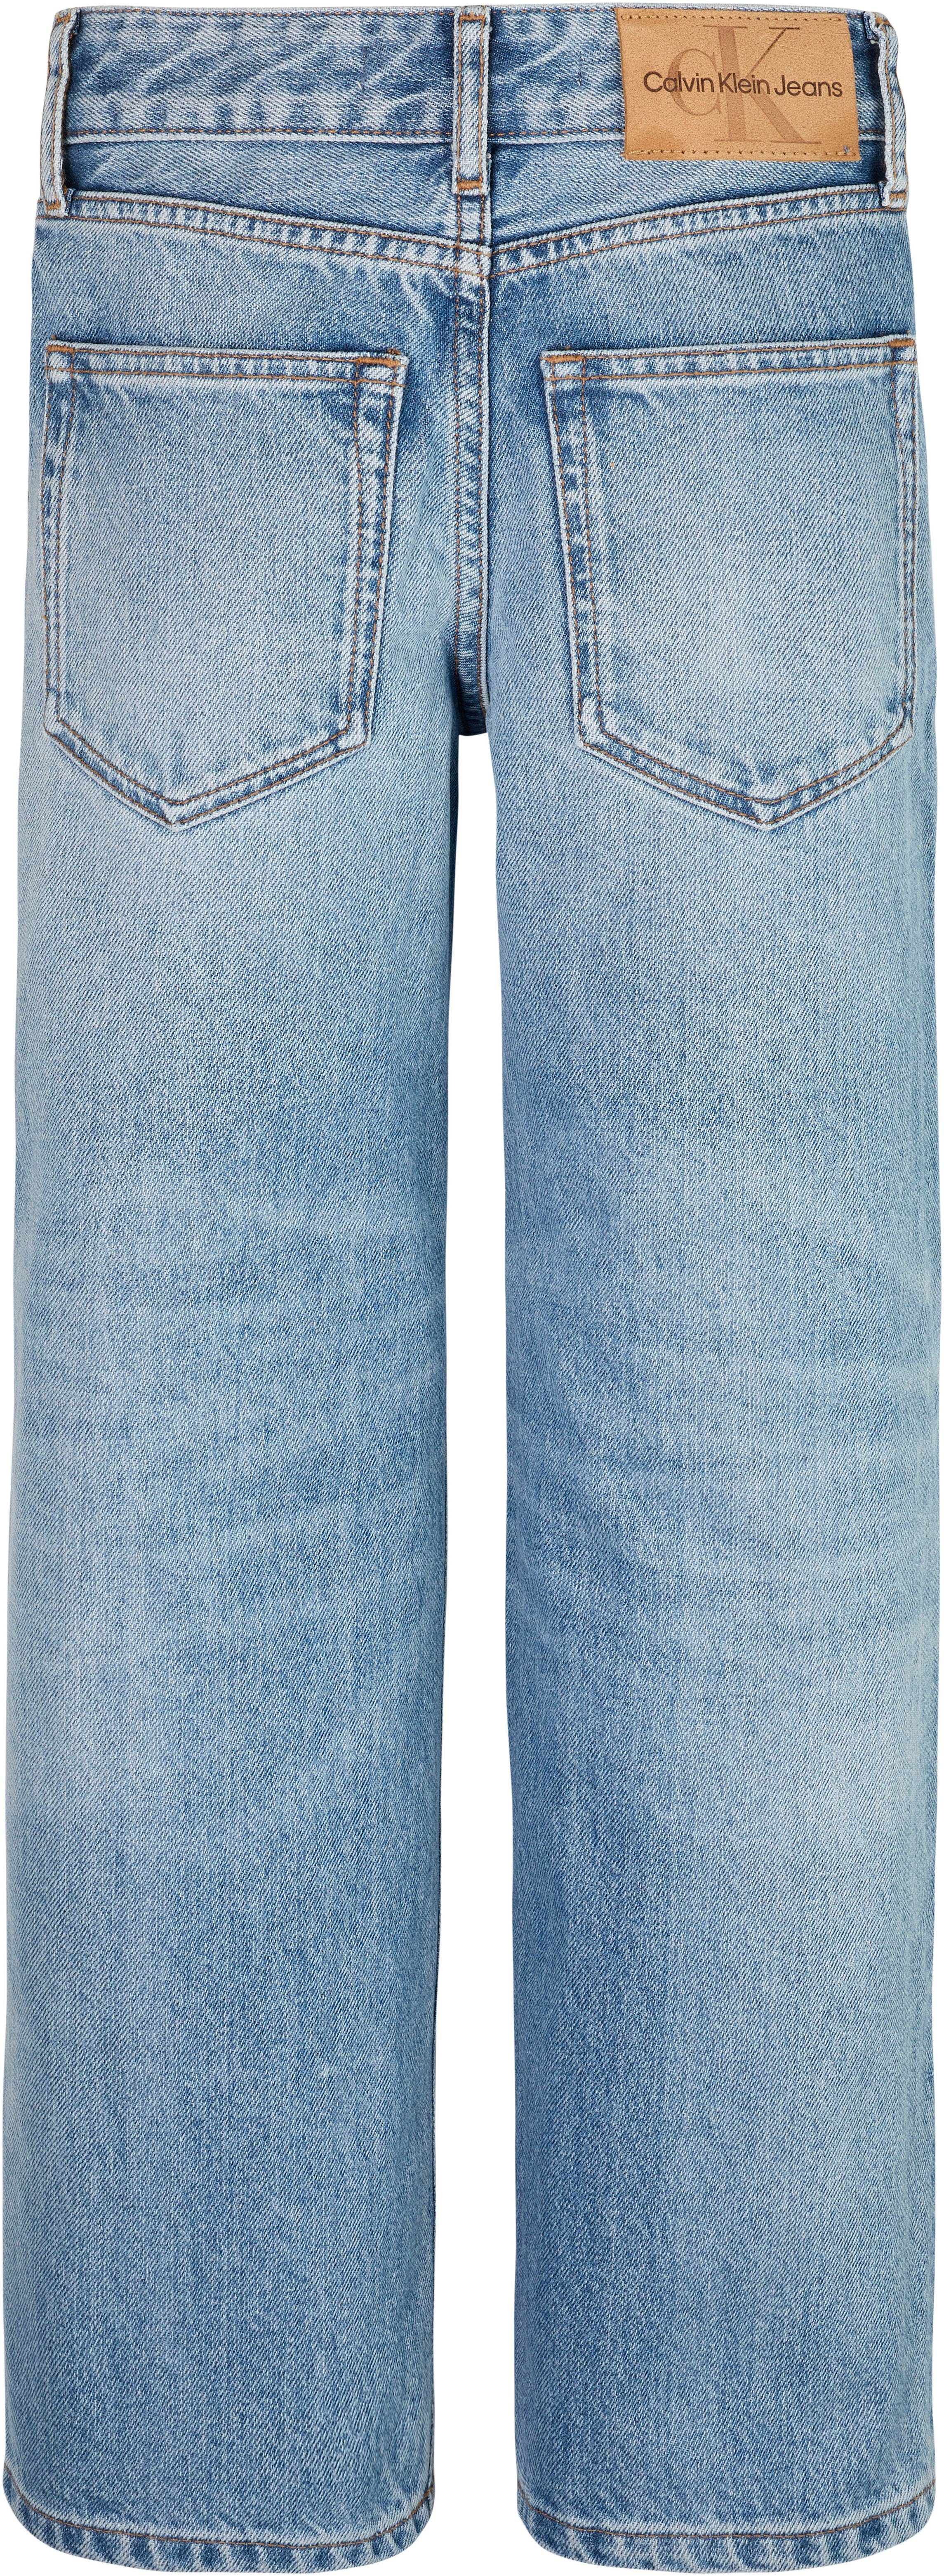 Calvin Klein Stretch-Jeans SKATER RELAXED BLUE AUTH. LIGHT Jeans